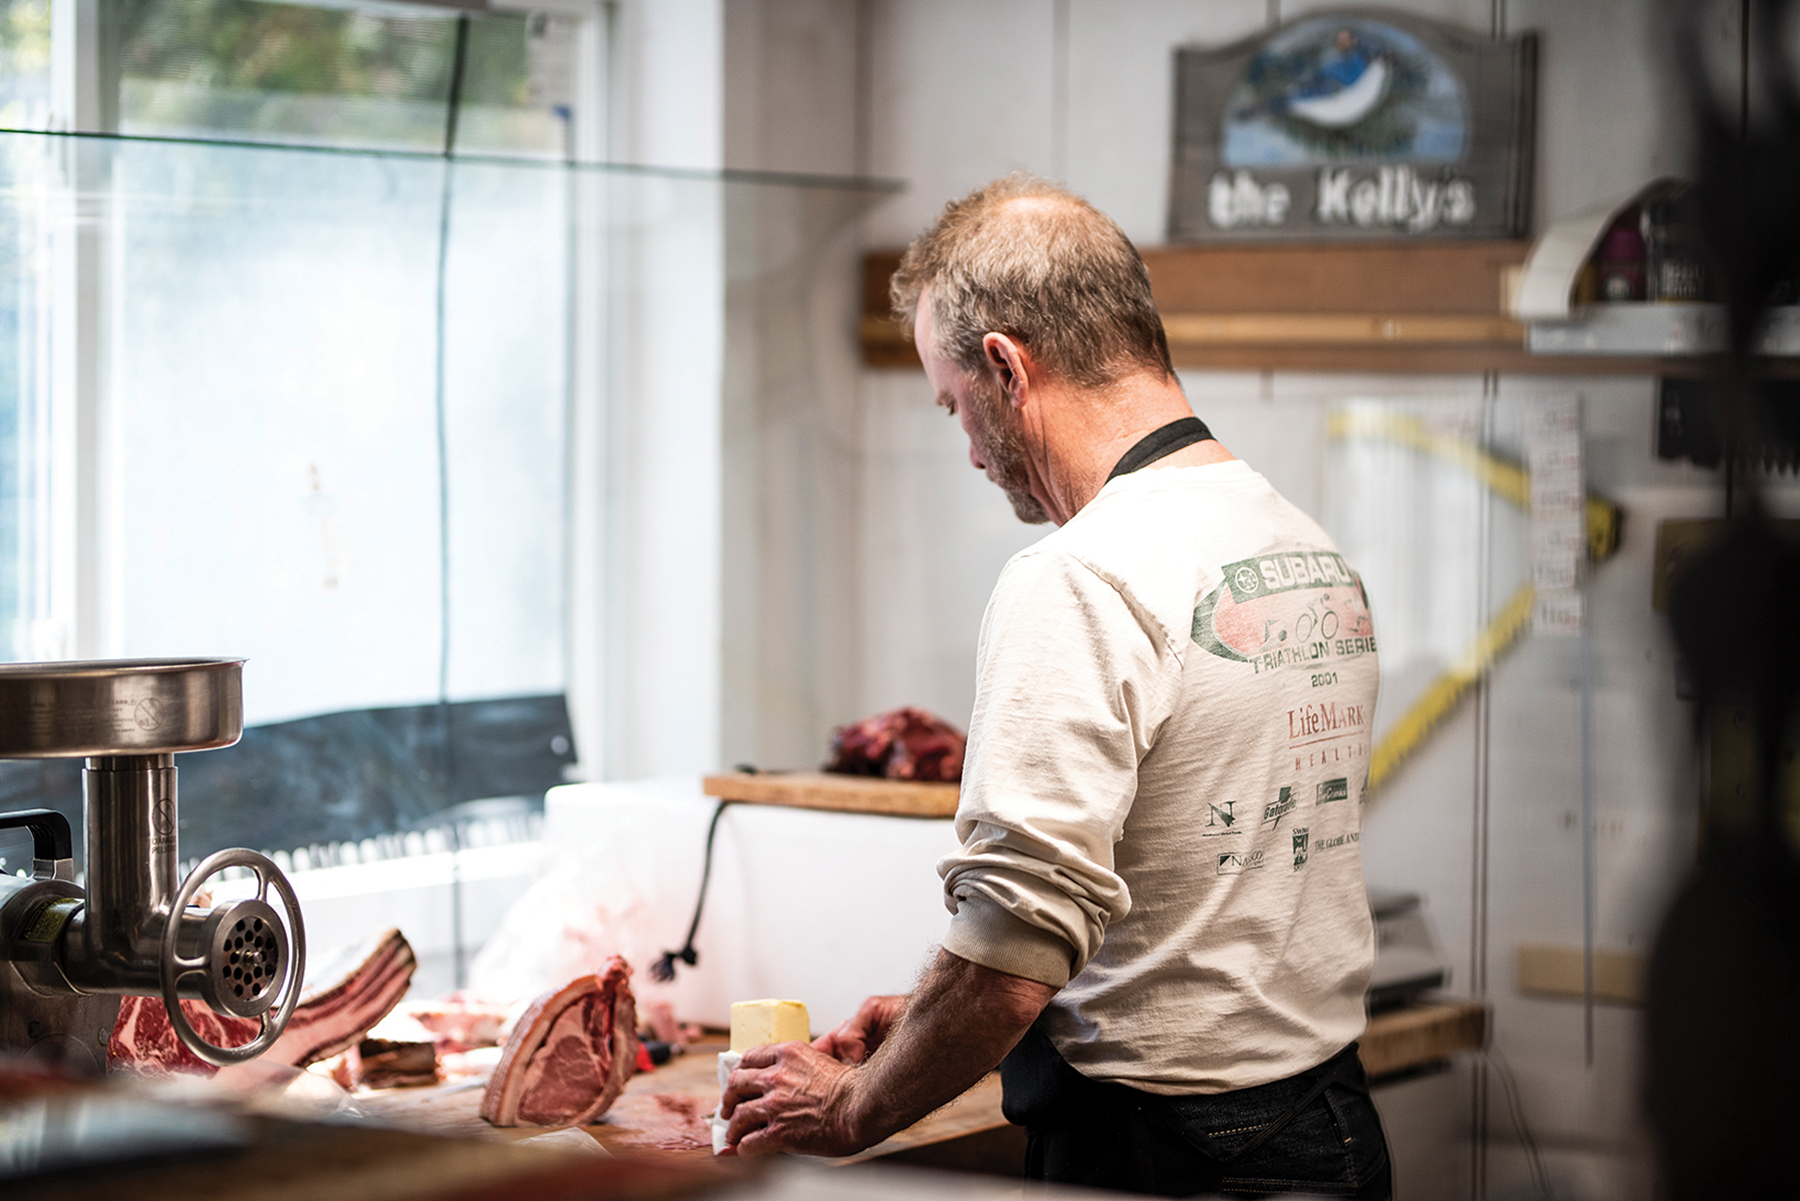 Sean Kelly, owner of Black Angus Fine Meats & Game in Craigleith, cuts meat to order and also offers a variety of frozen meats and prepared foods.